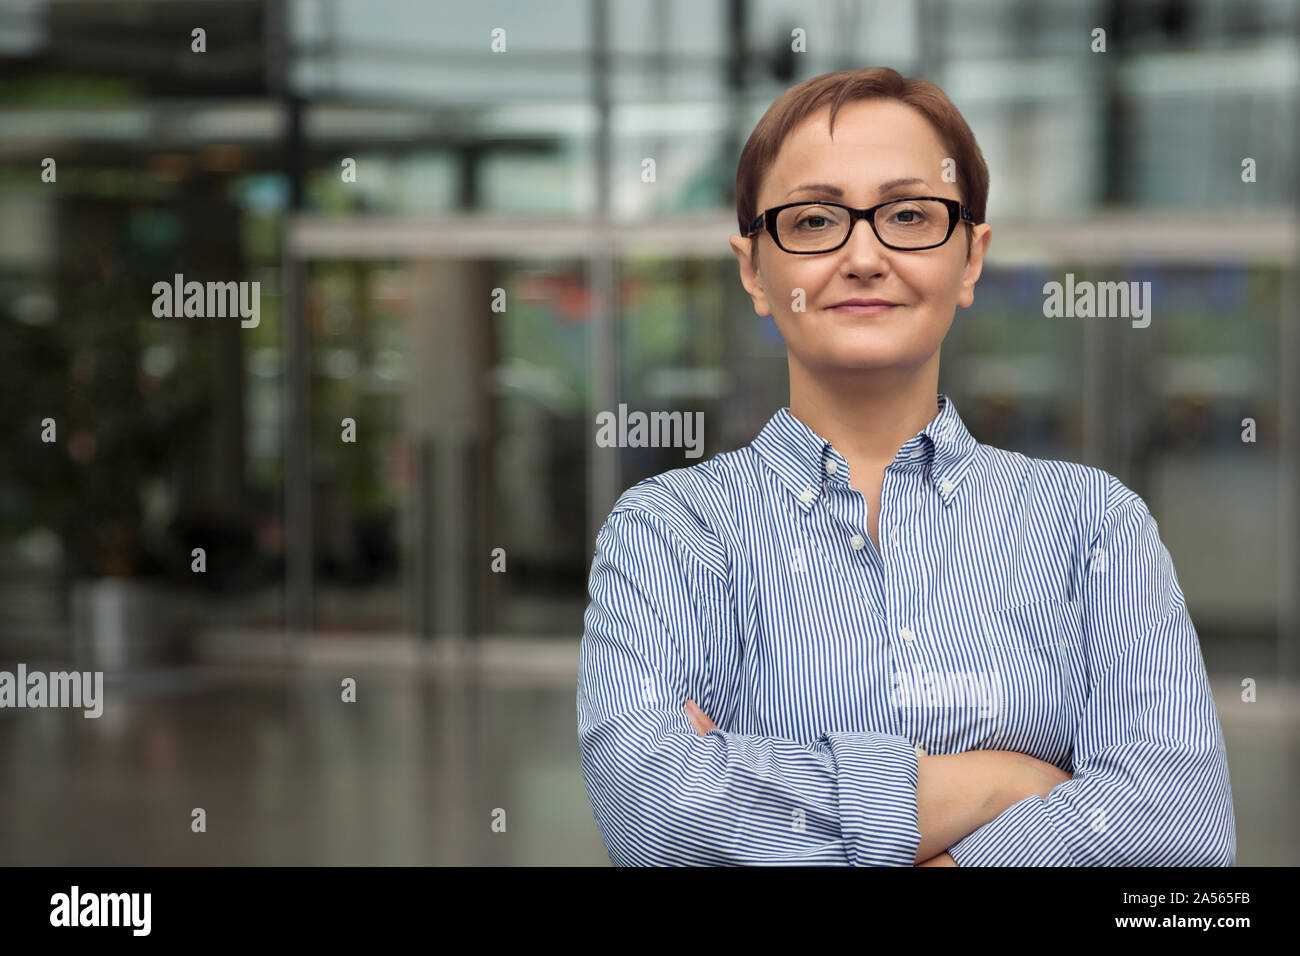 Business woman. Headshot of middle aged businesswoman in the office. Stock Photo